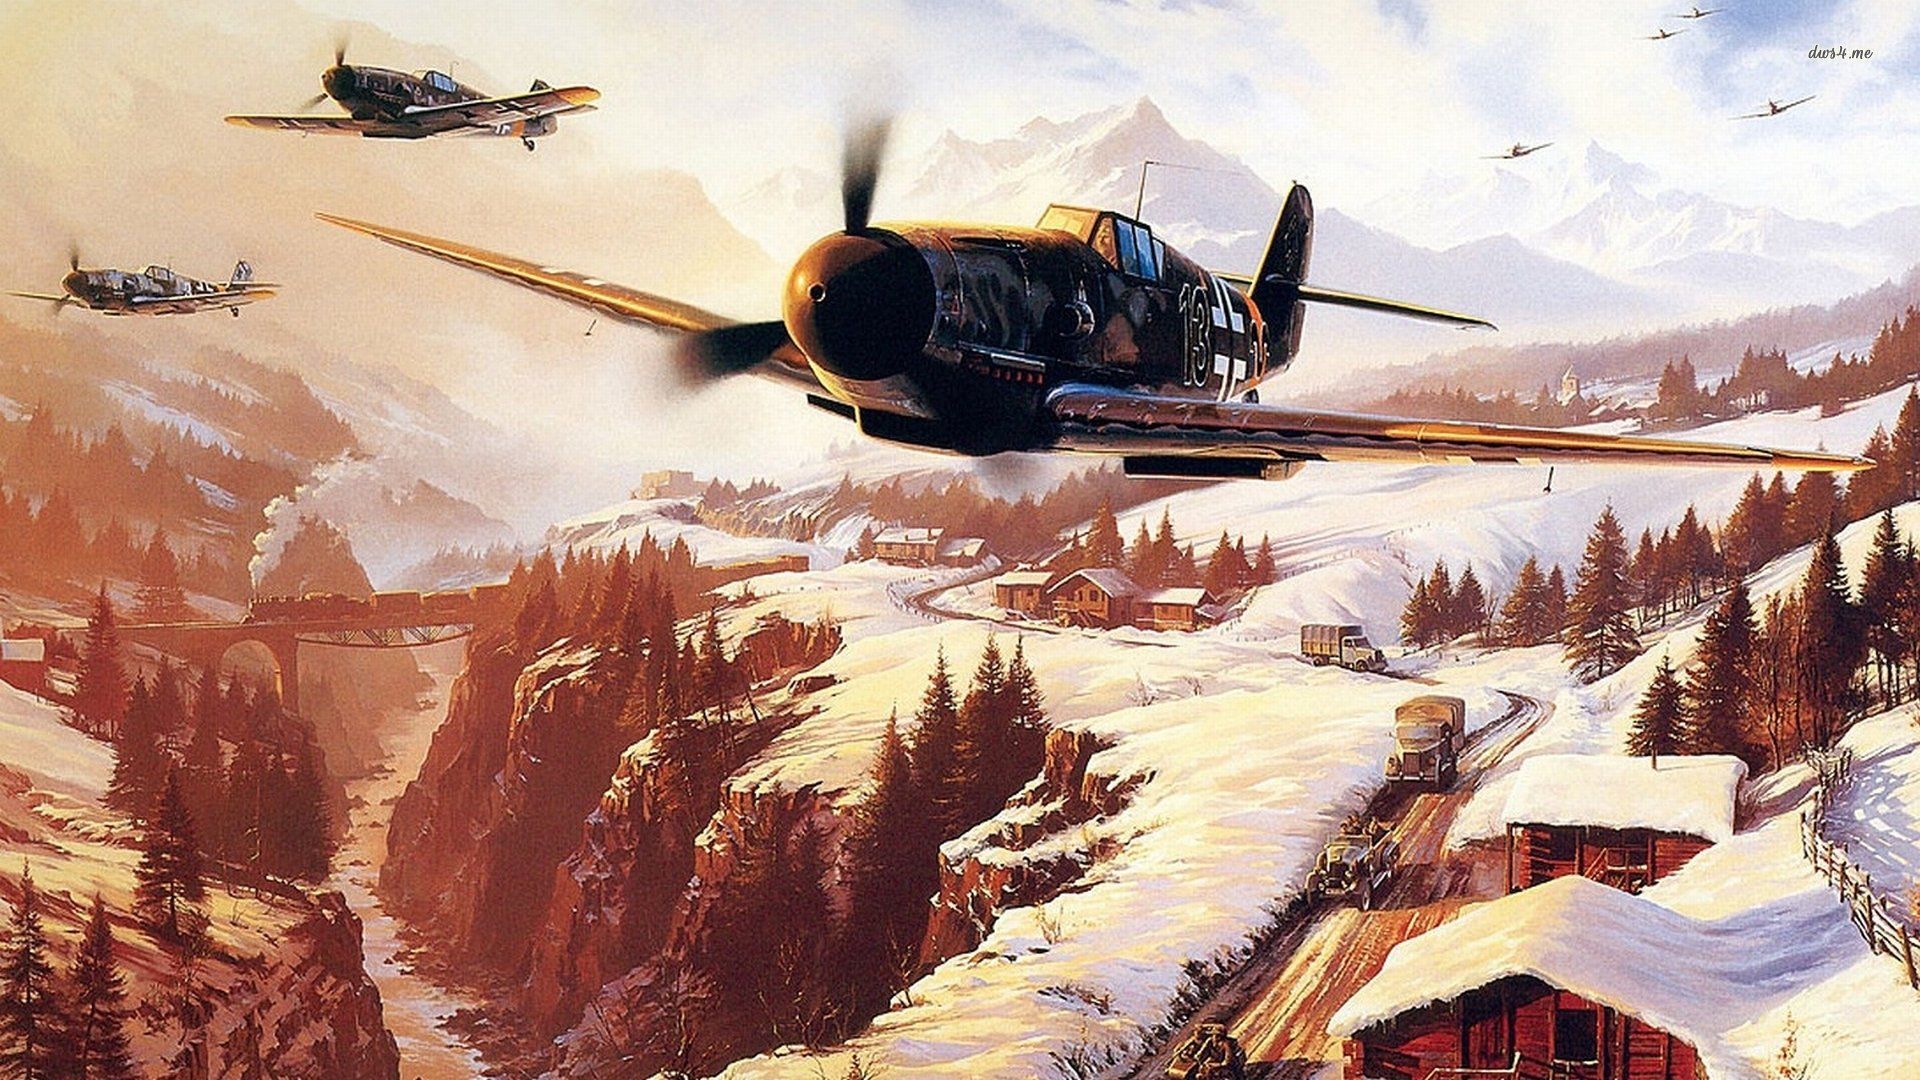 Download Ww2 Aircraft Wallpaper Gallery